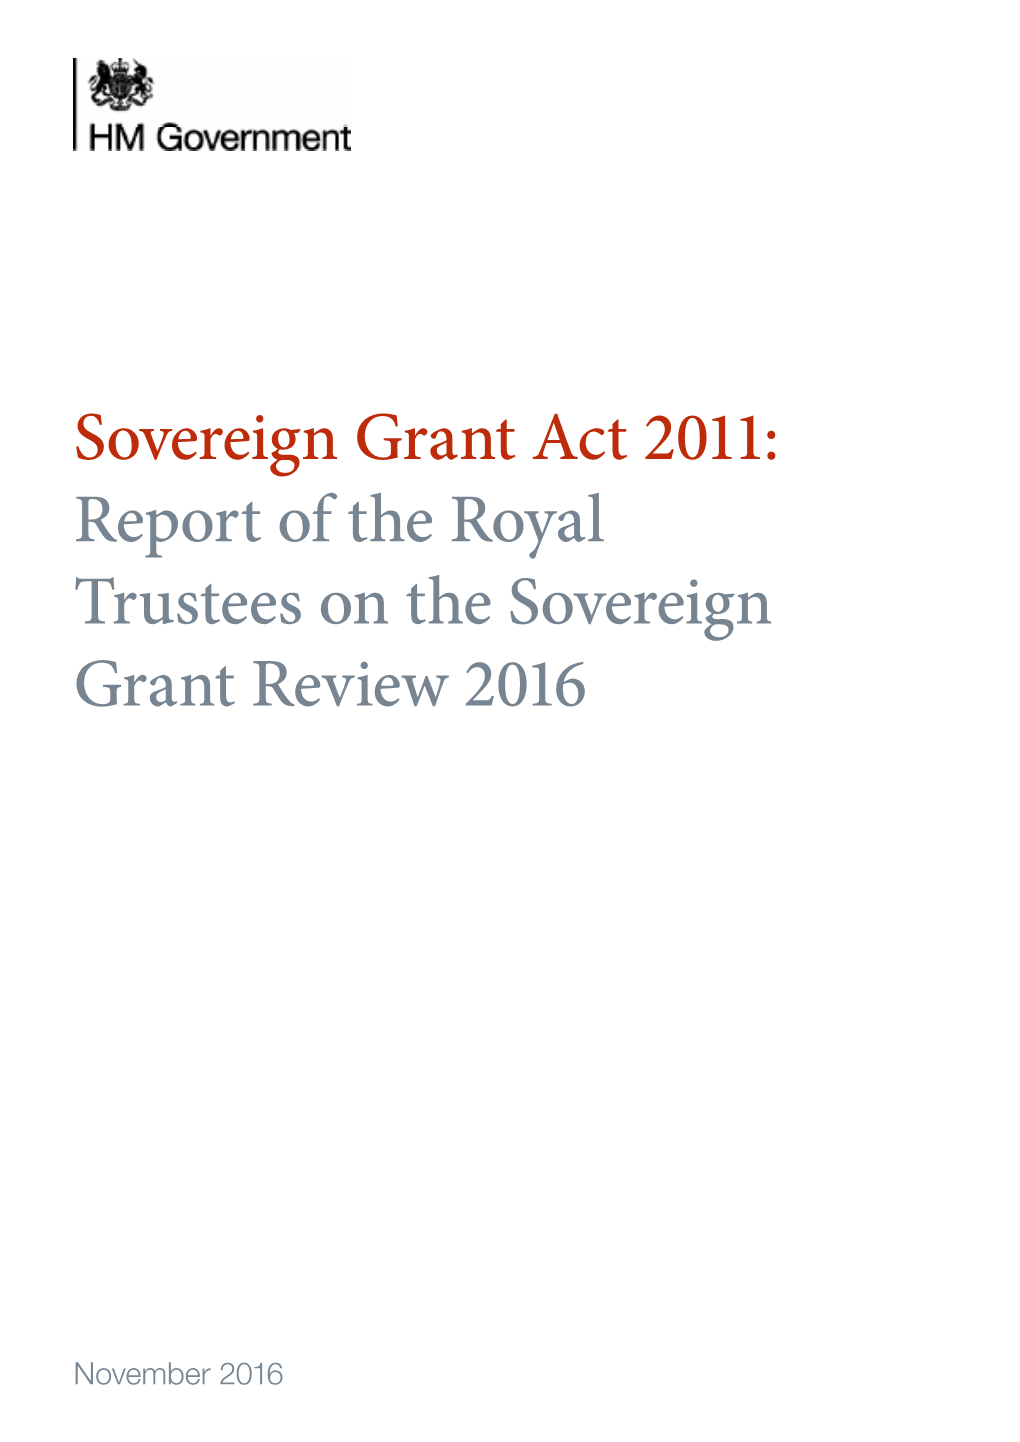 Report of the Royal Trustees on the Sovereign Grant Review 2016